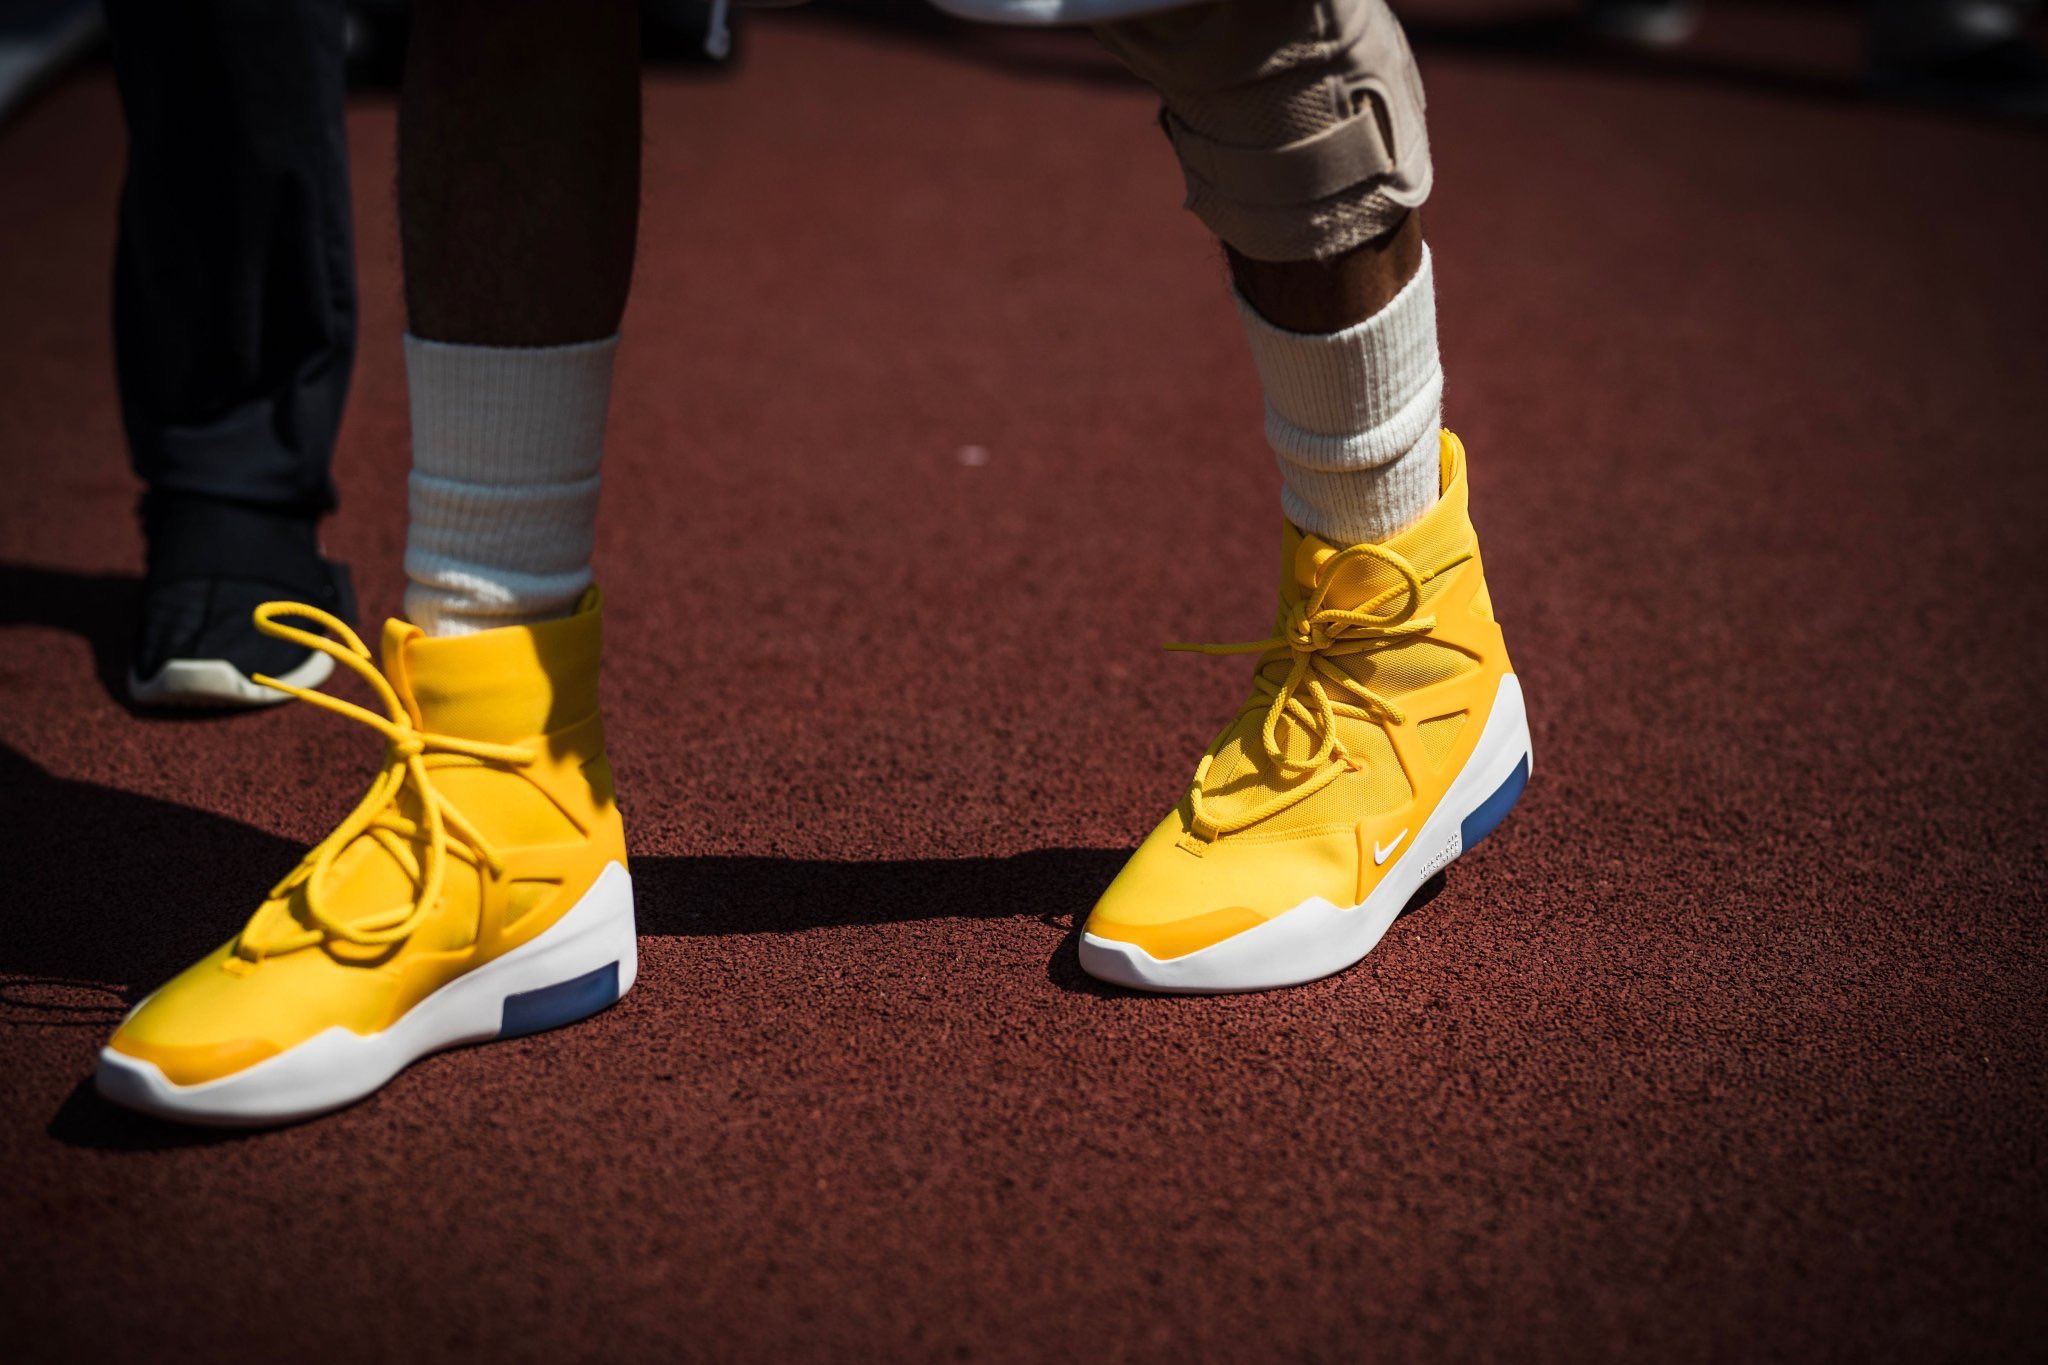 Complex Sneakers on Twitter: ".@JERRYlorenzo rocking yellow Nike Fear of God he wants you to call anything but “Amarillo” at the MLB Softball Game. 📸: @Cut4 https://t.co/DvO4UH9EmC" /